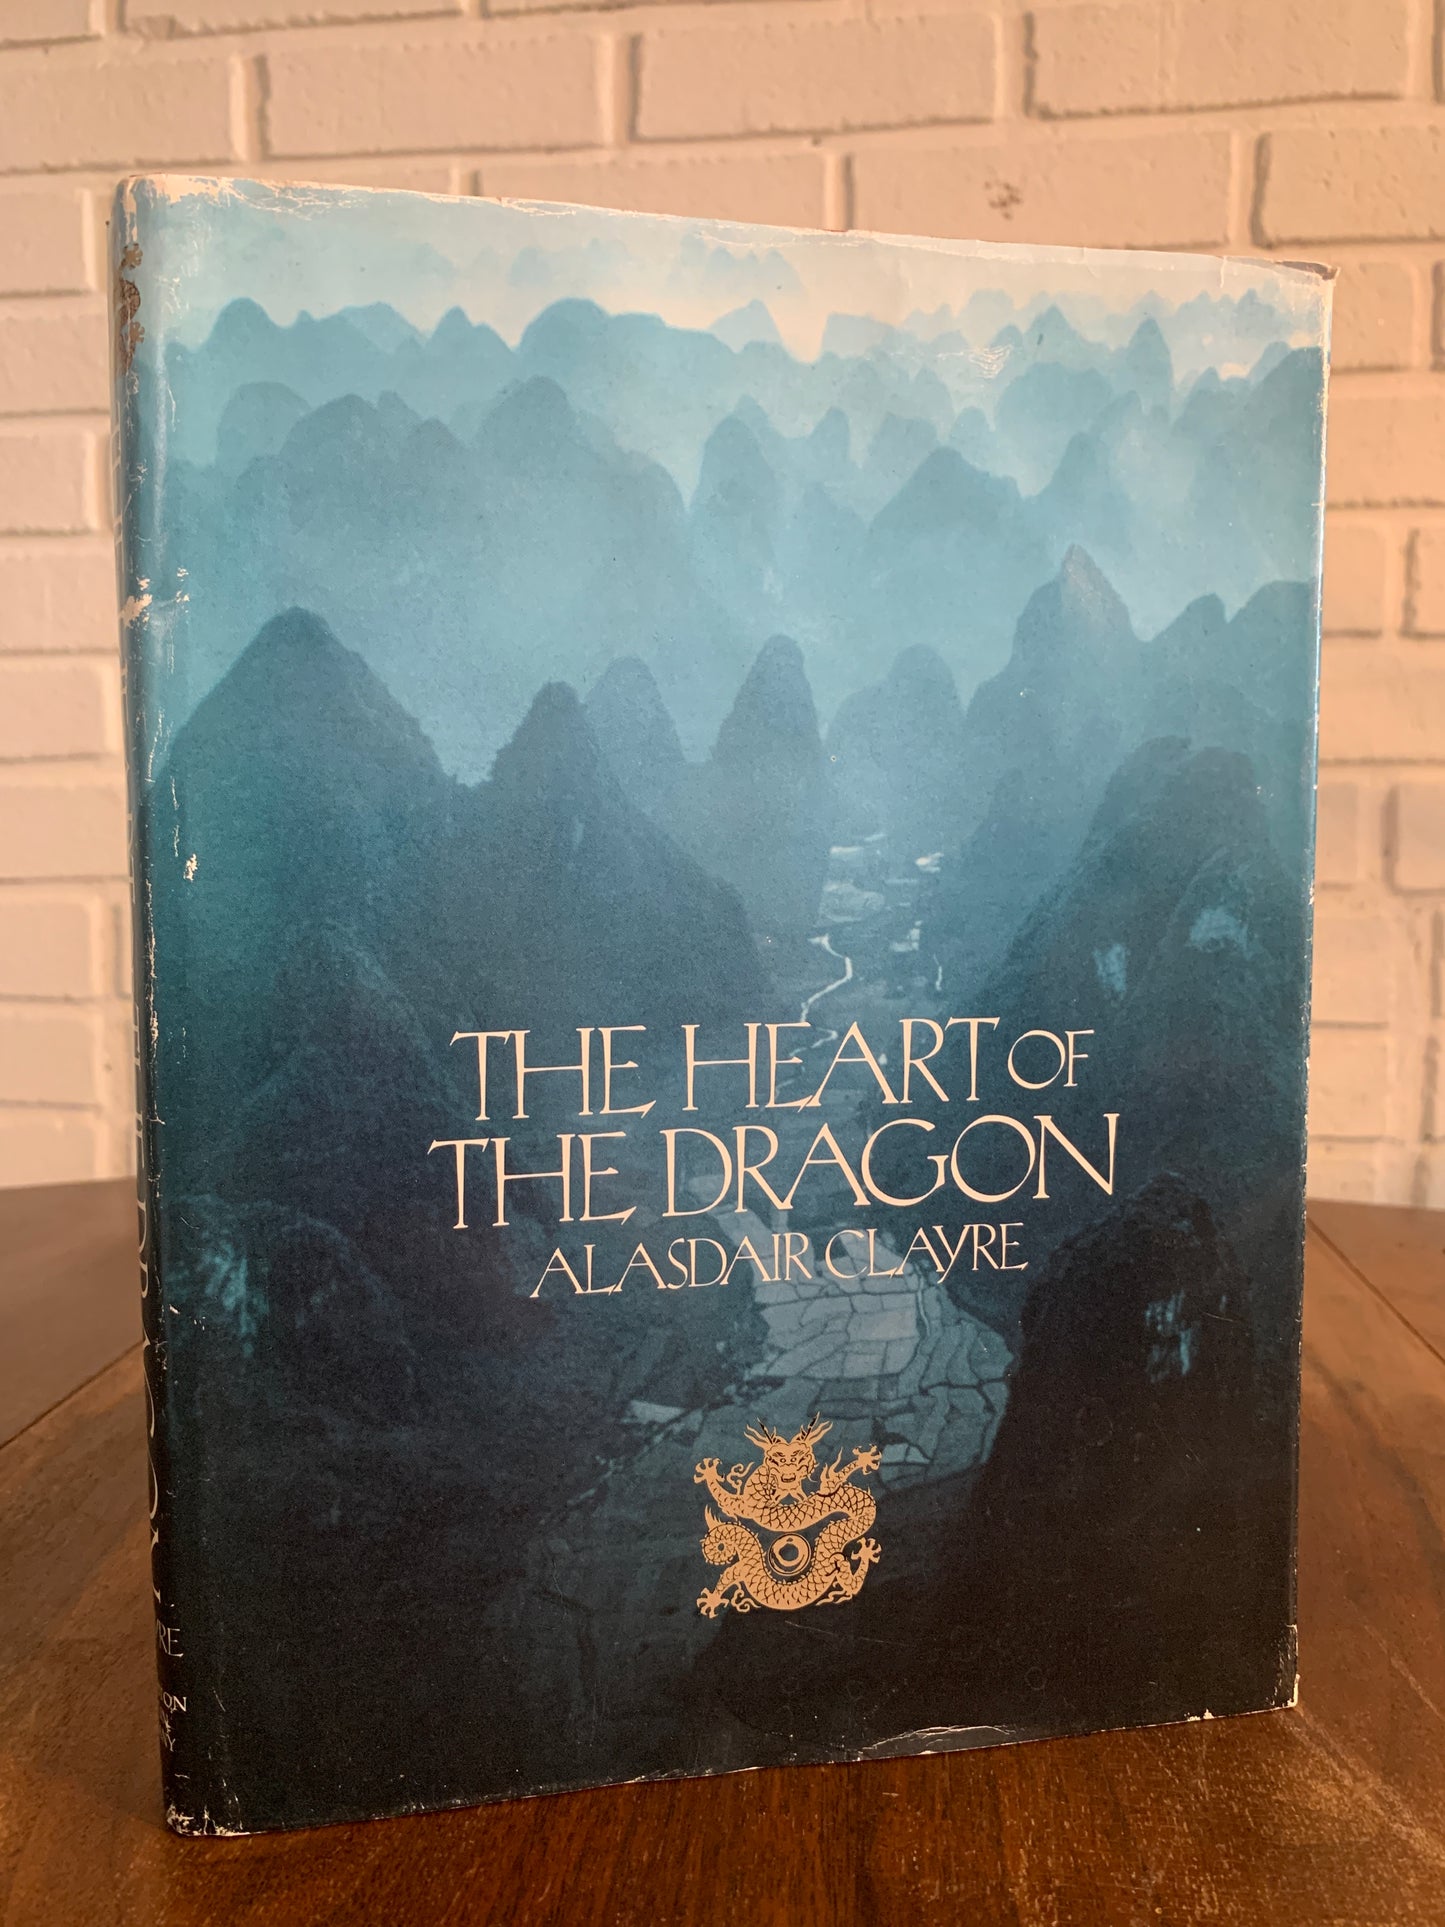 The Heart of the Dragon by Alasdair Clayre 1985